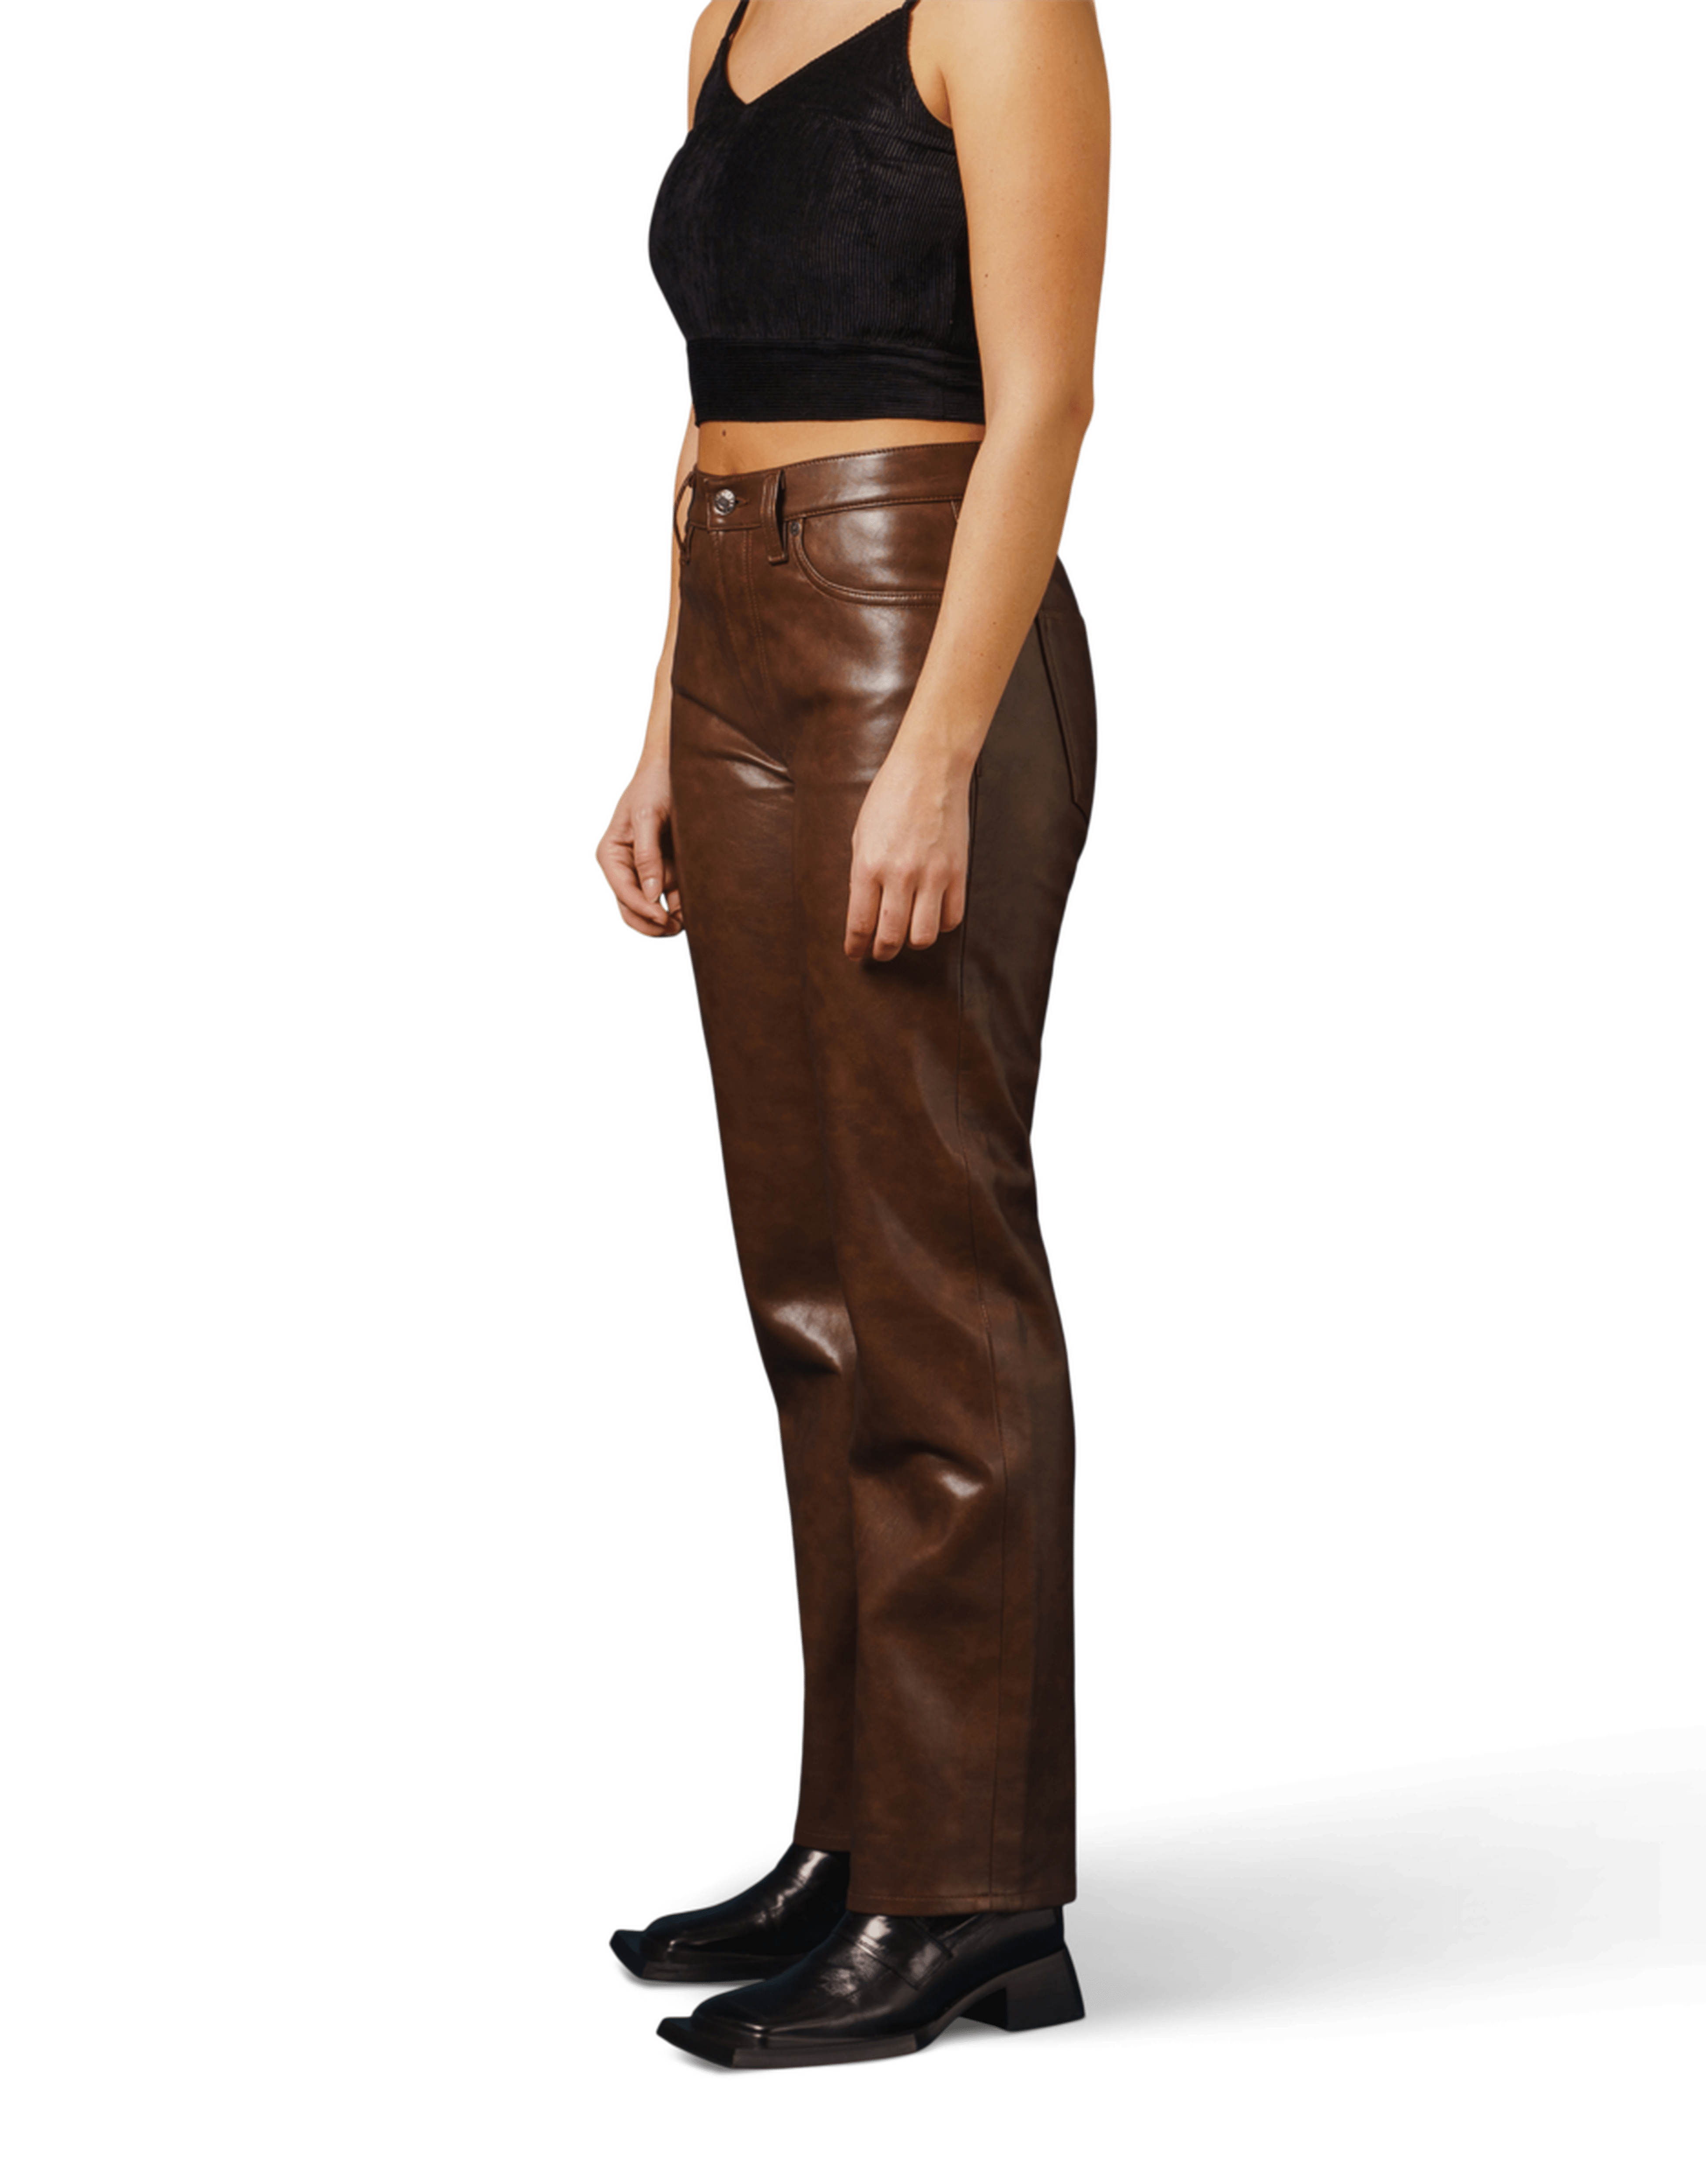 Sloane Leather Jeans